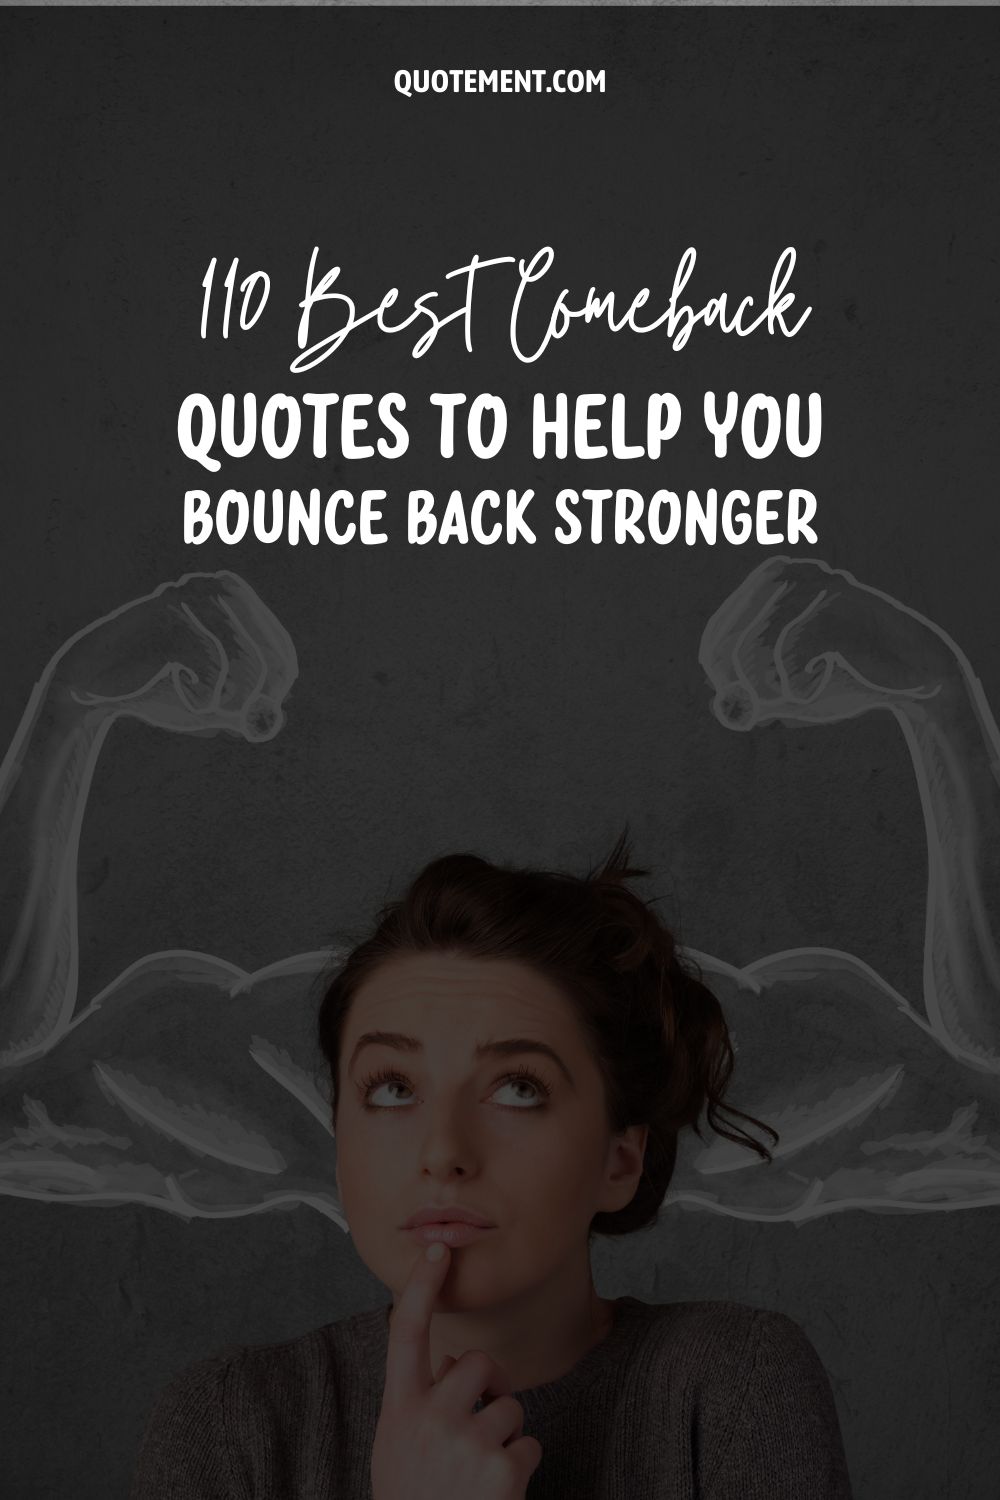 110 Best Comeback Quotes To Help You Bounce Back Stronger